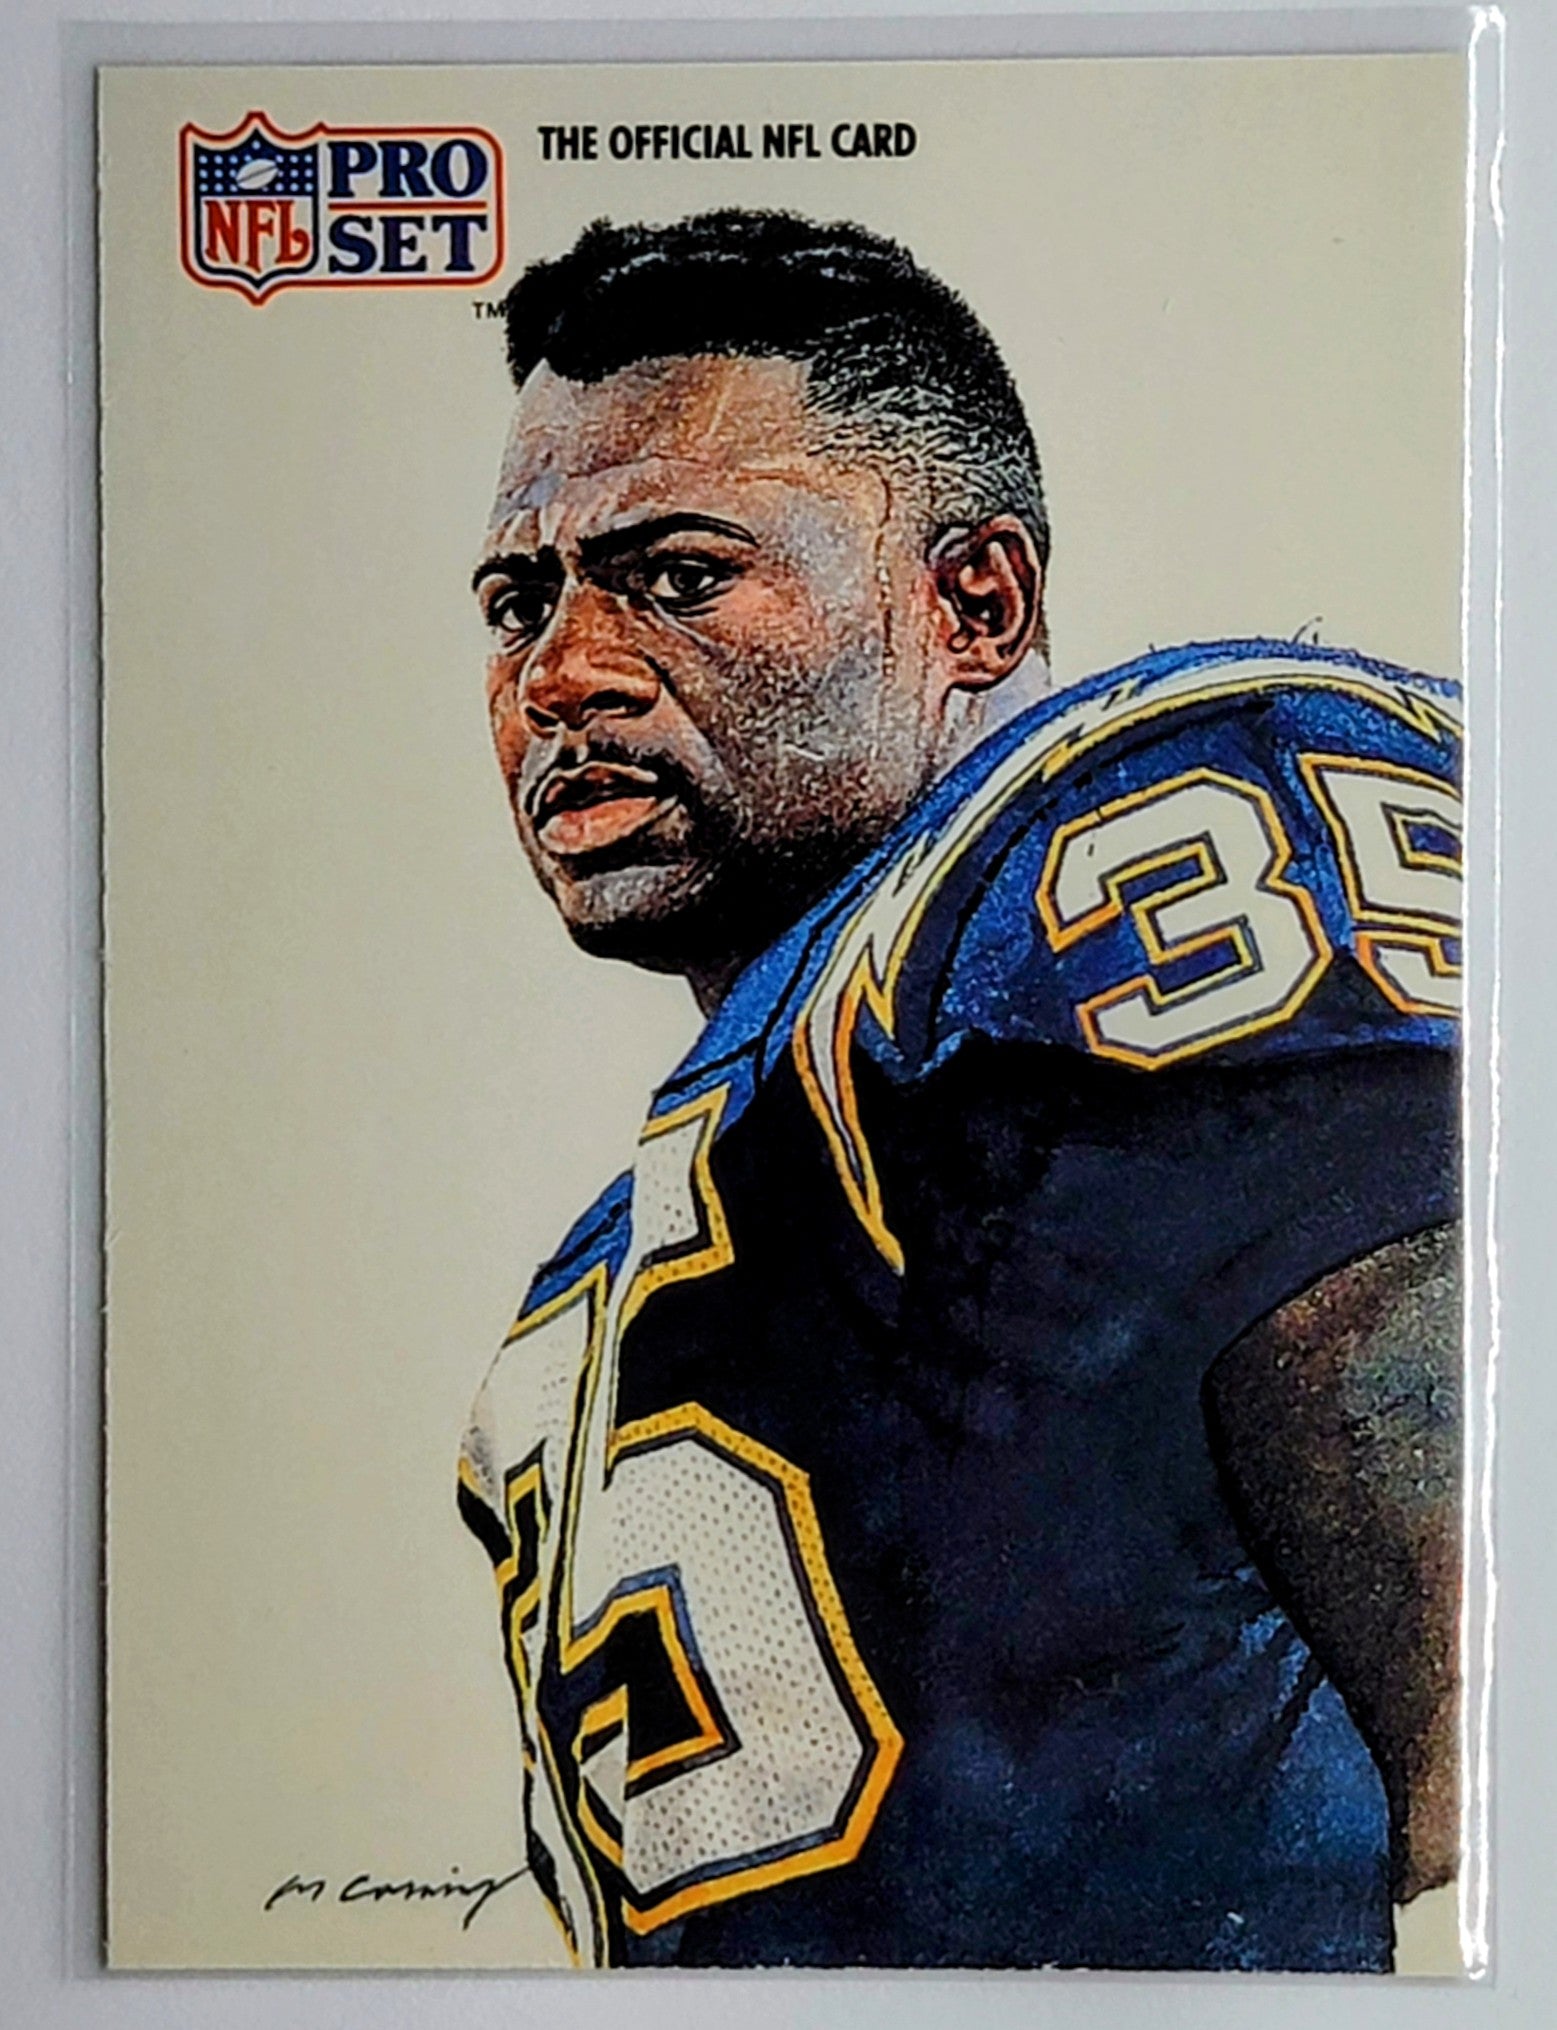 1991 Pro Set Marion Butts   PB San Diego Chargers Football Card  TH1CB simple Xclusive Collectibles   